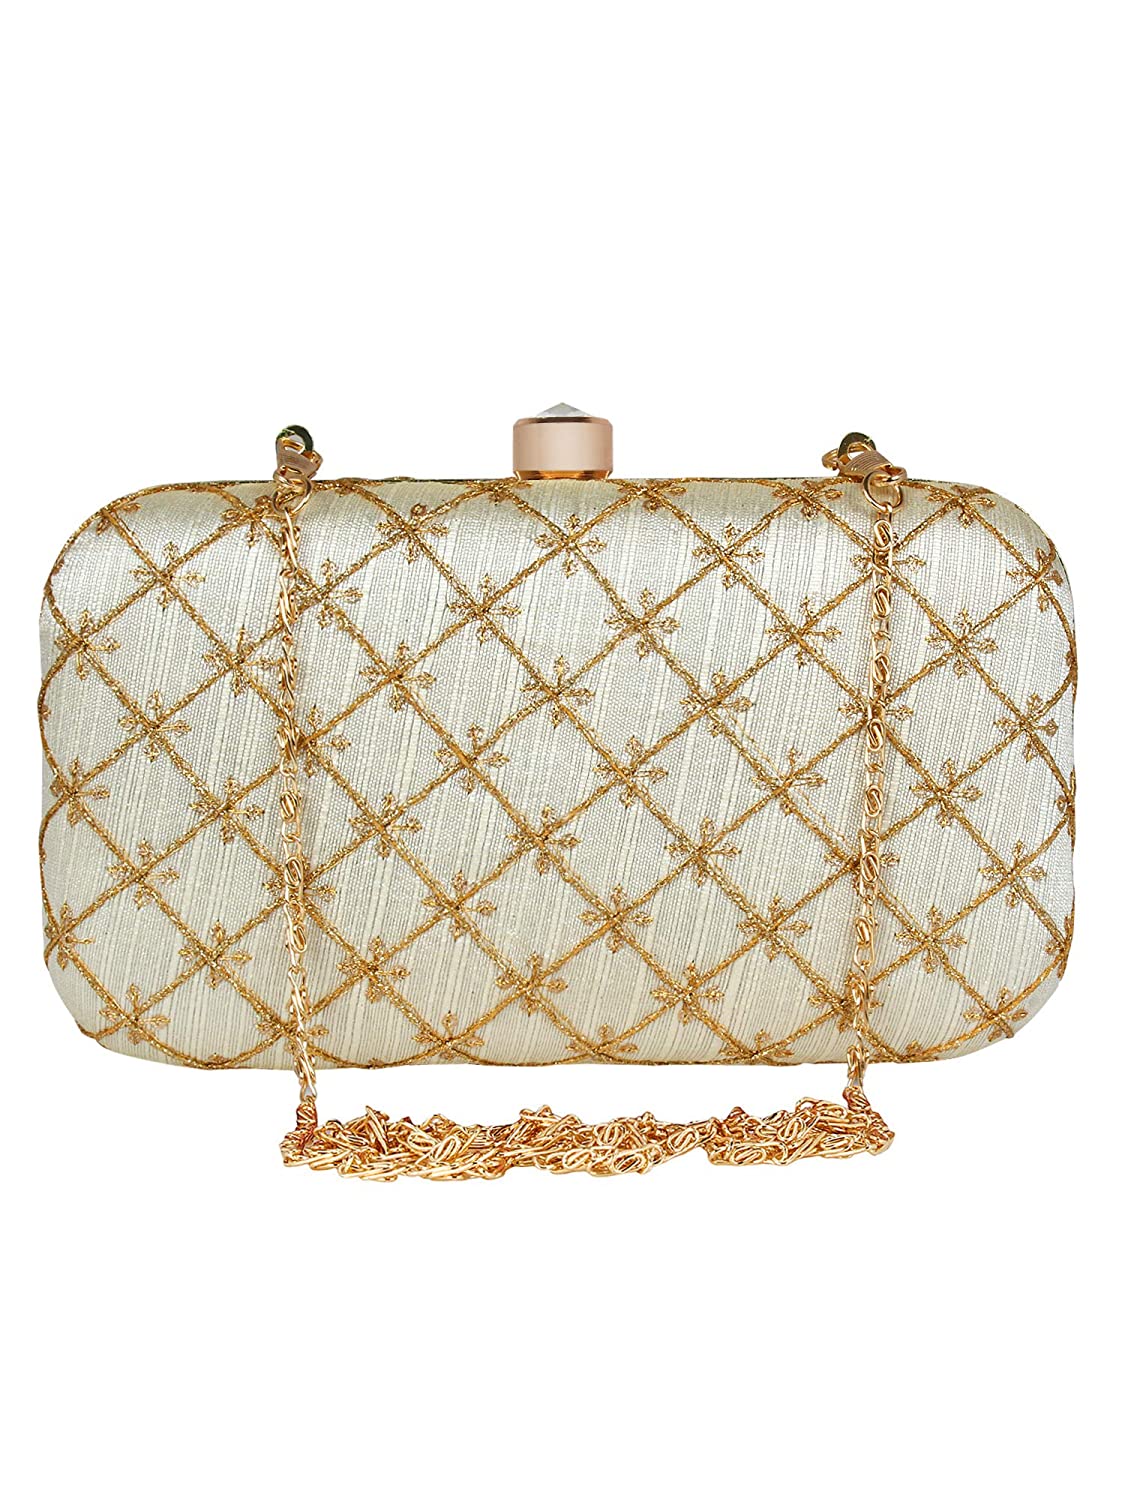 Women's White Color tulle Embroidered Faux Silk Clutch - VASTANS